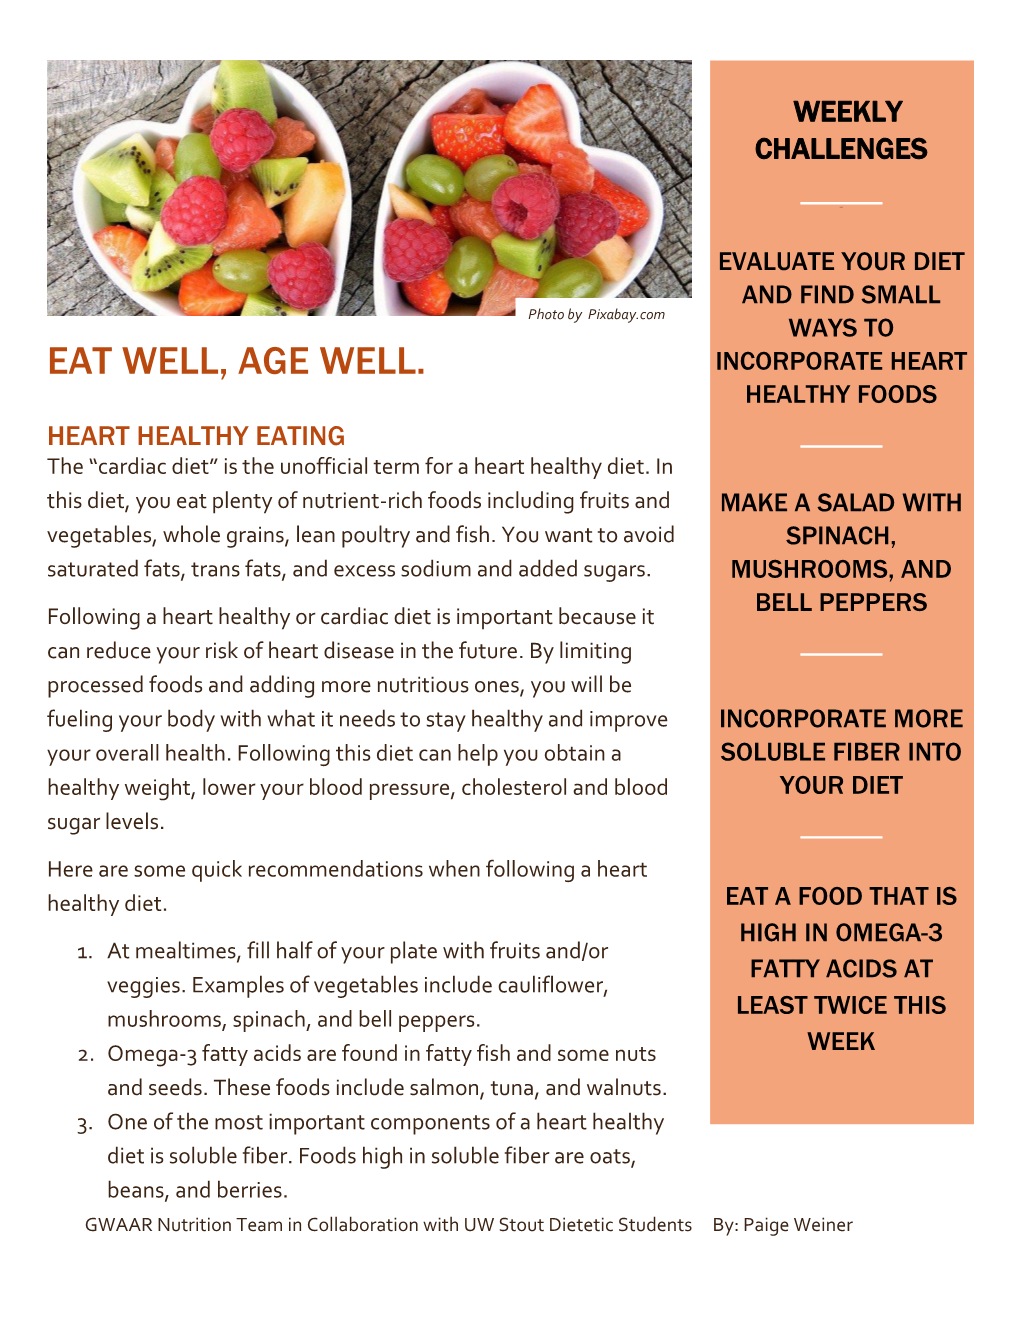 Eat Well, Age Well. Incorporate Heart Healthy Foods Heart Healthy Eating